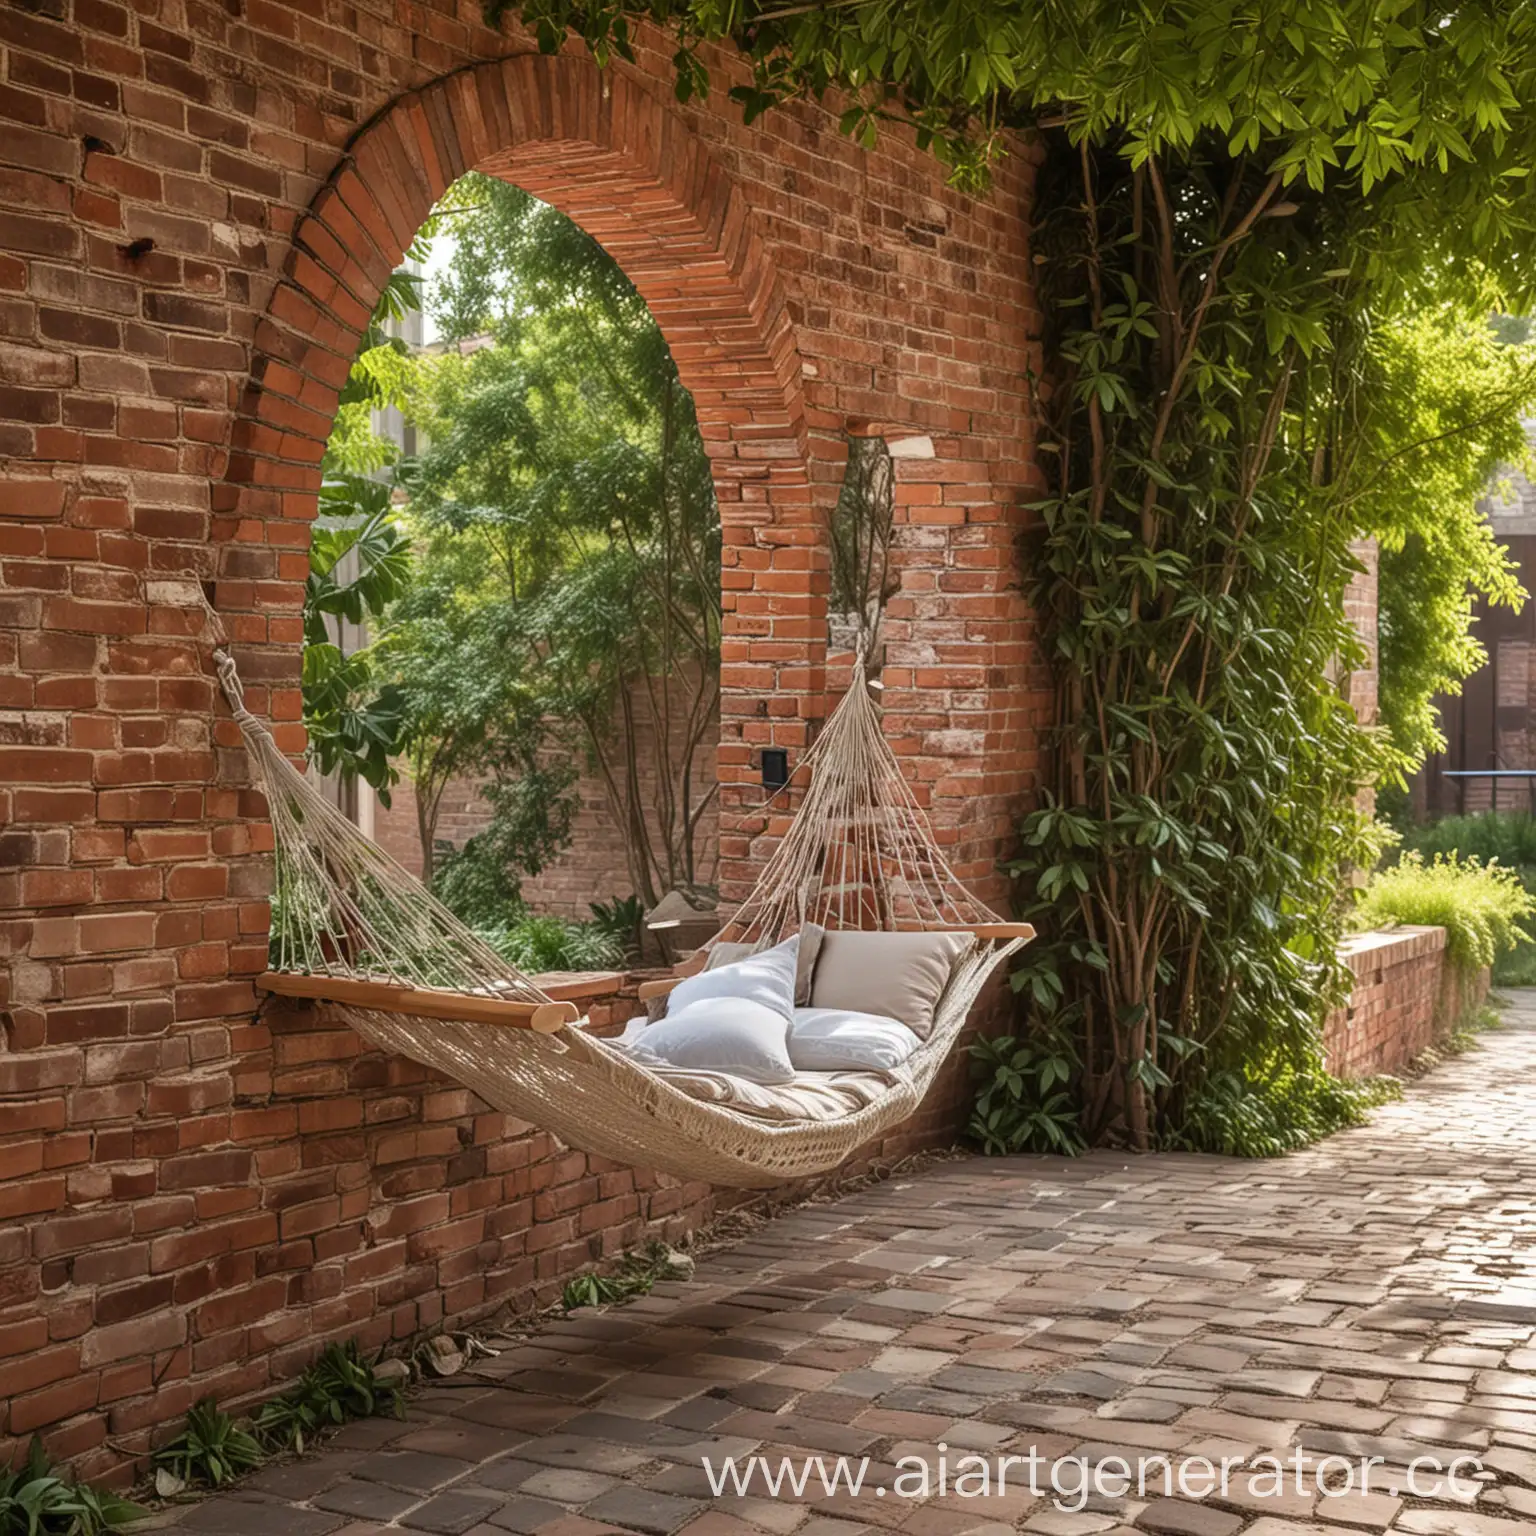 Triangle-Hammock-Between-Brick-Columns-for-Comfortable-Reading-in-Shade